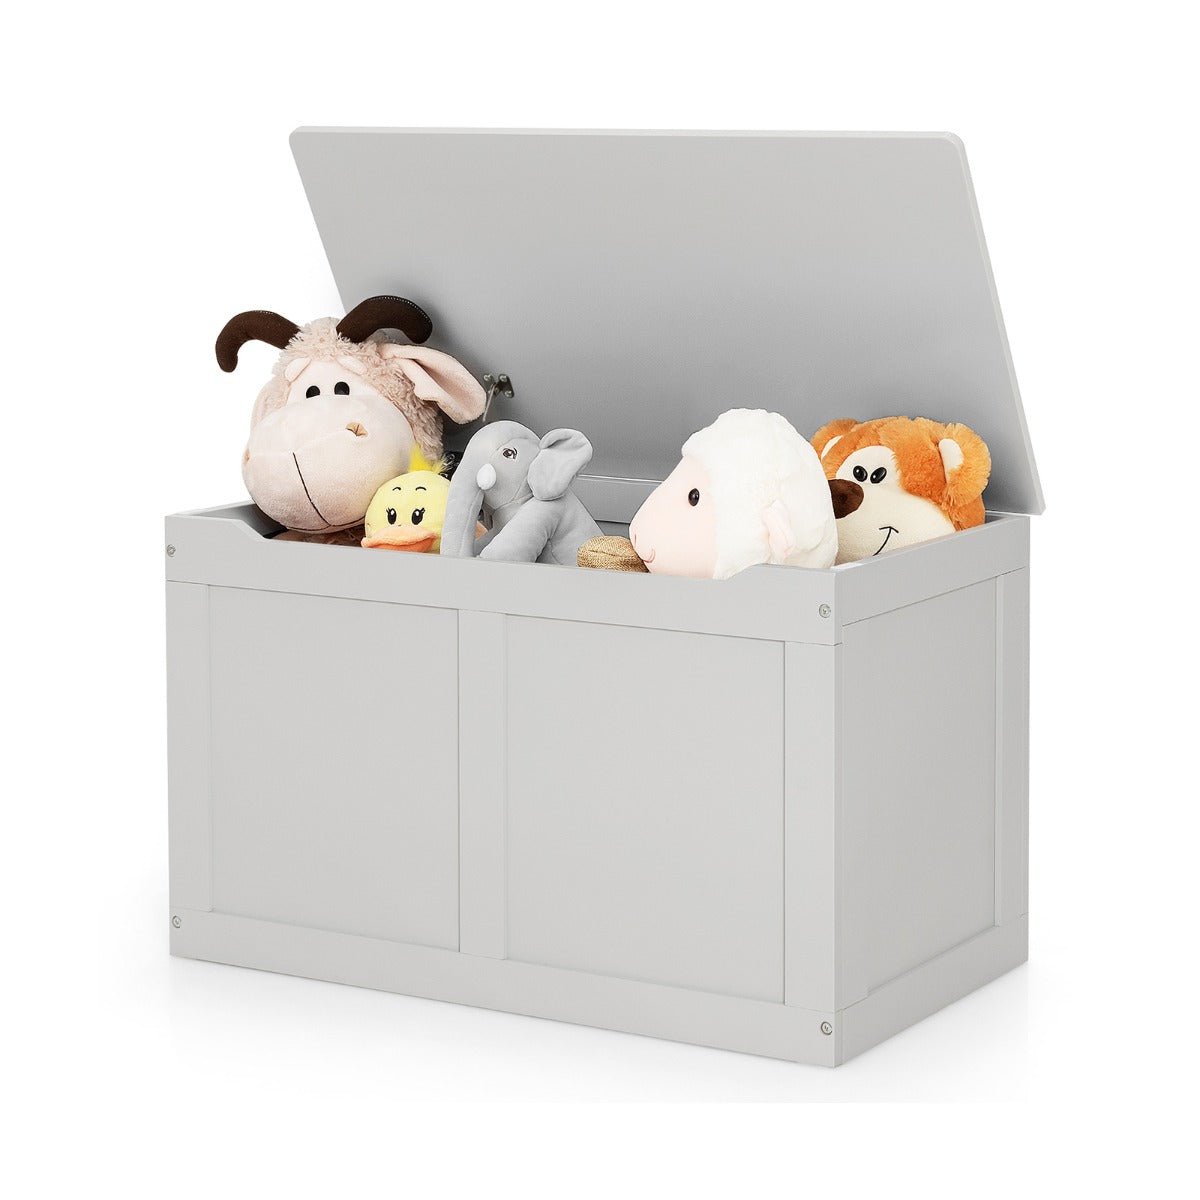 Toys organised in Grey Wooden Toy Box for Kids